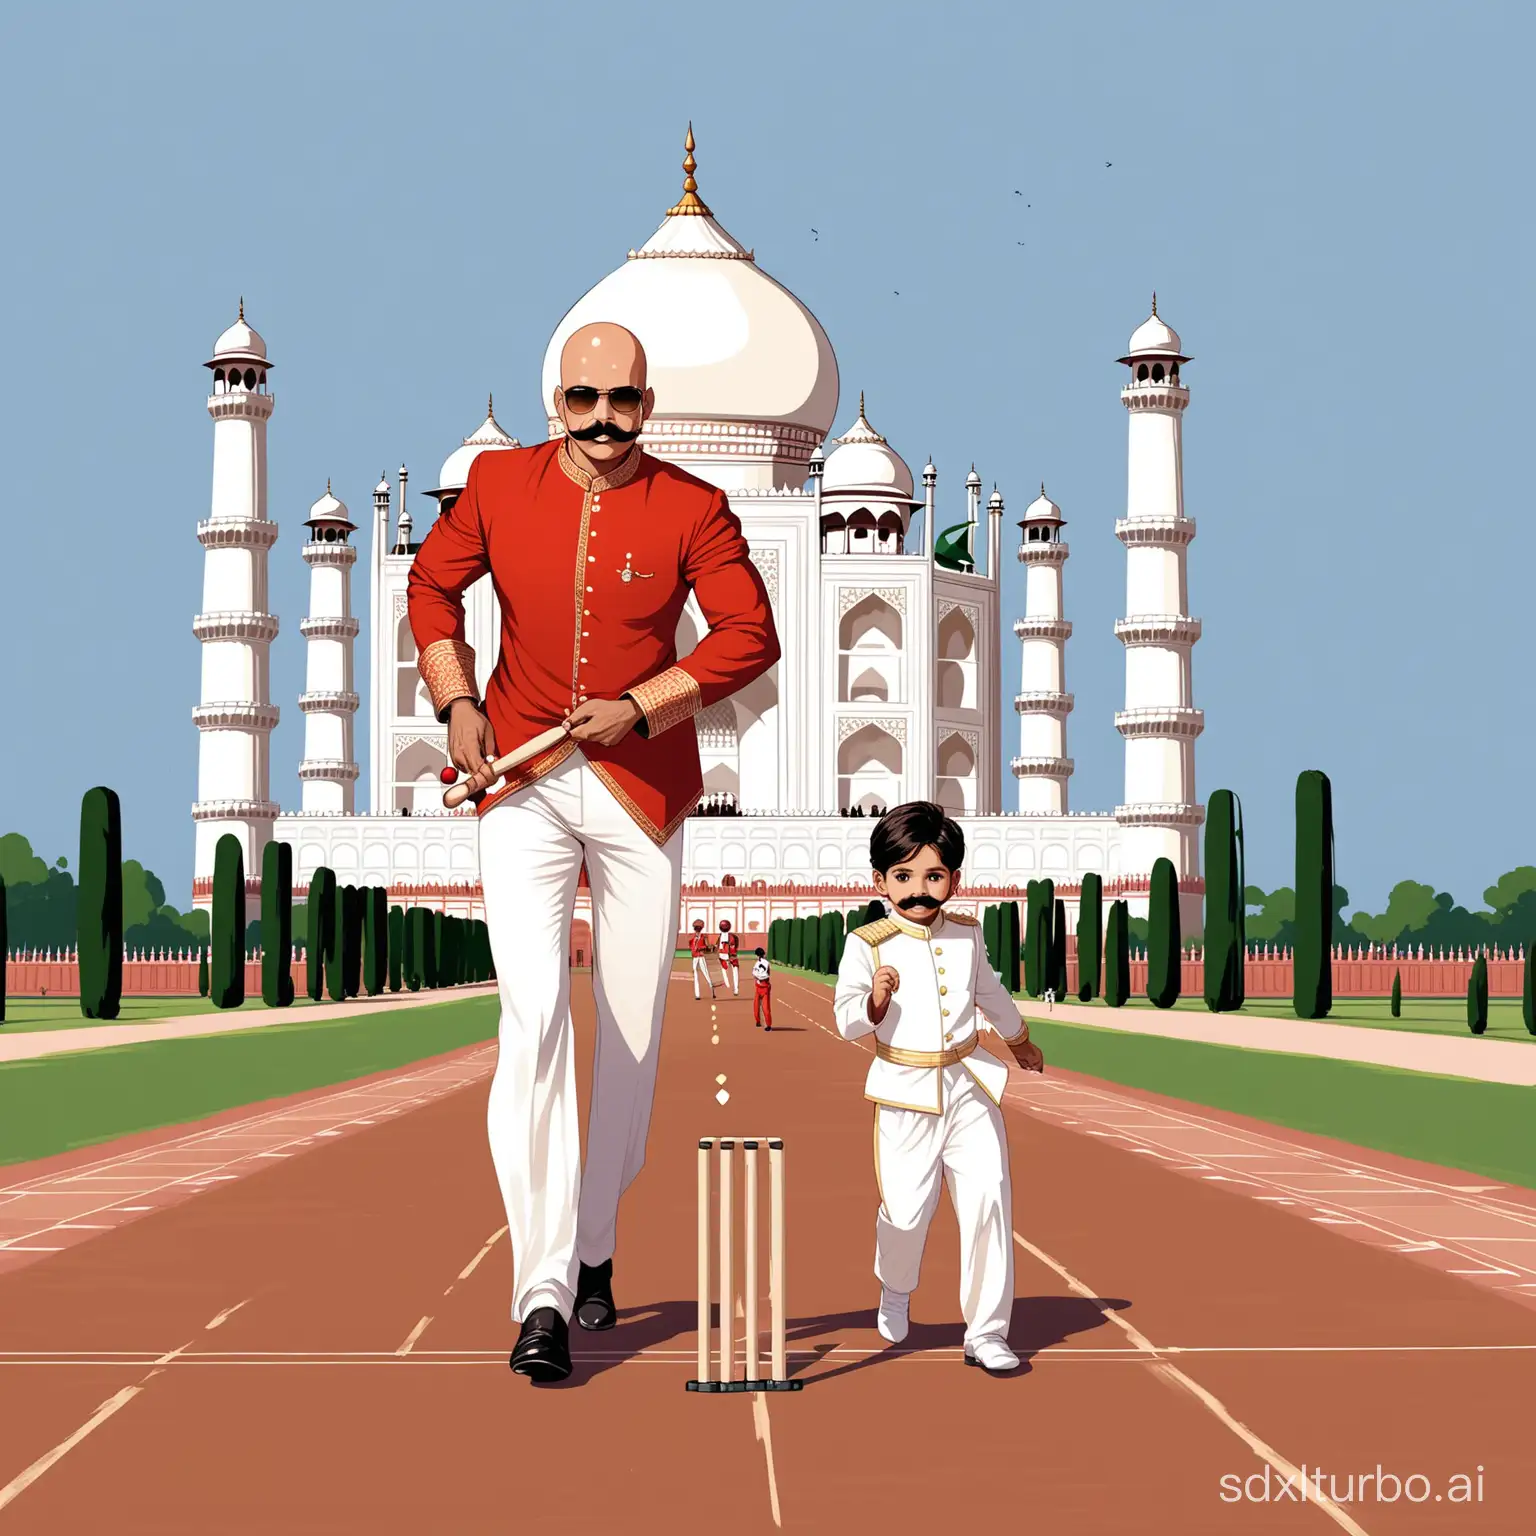 One indian 40 year old king in royal attire bald but handsome with moustache with his little cute daughter also in royal Knight Rider dress playing cricket infront Tajmahal 